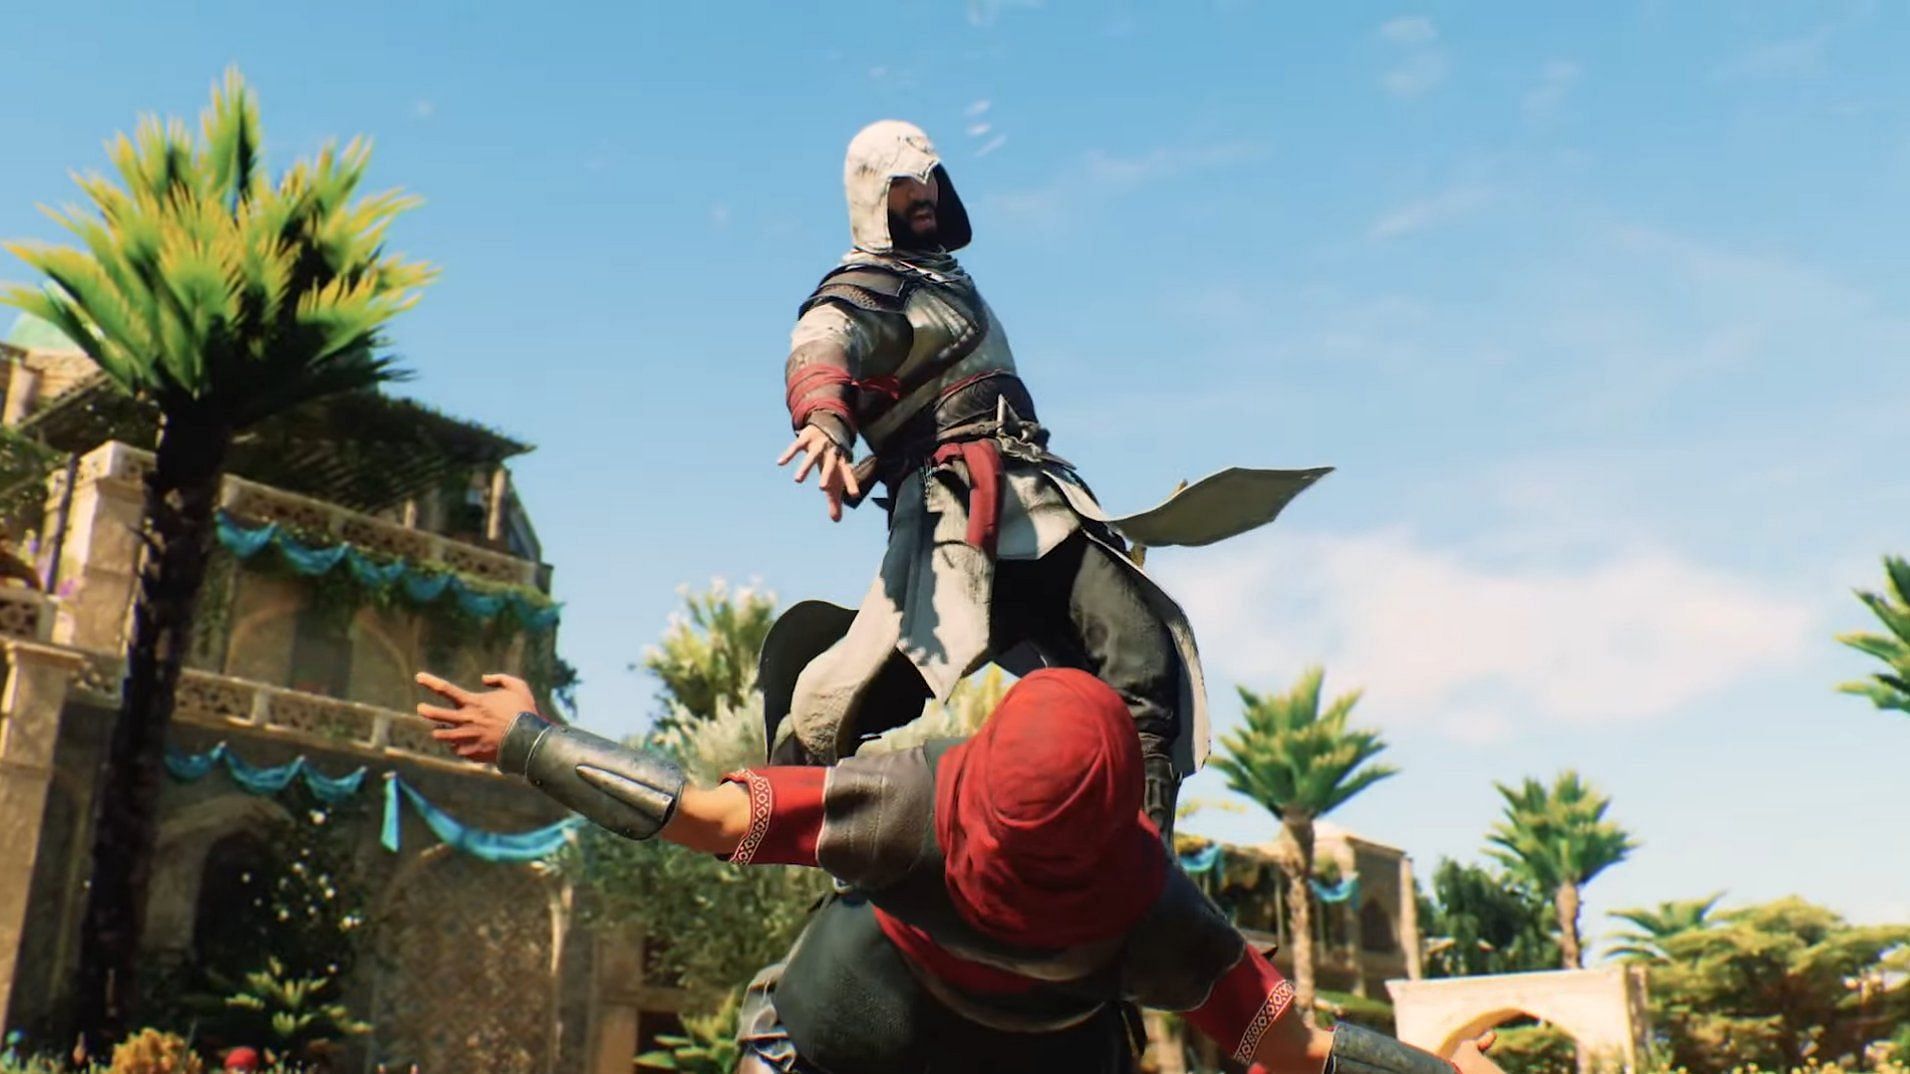 Assassin's Creed Mirage is the Next Instalment to the Franchise